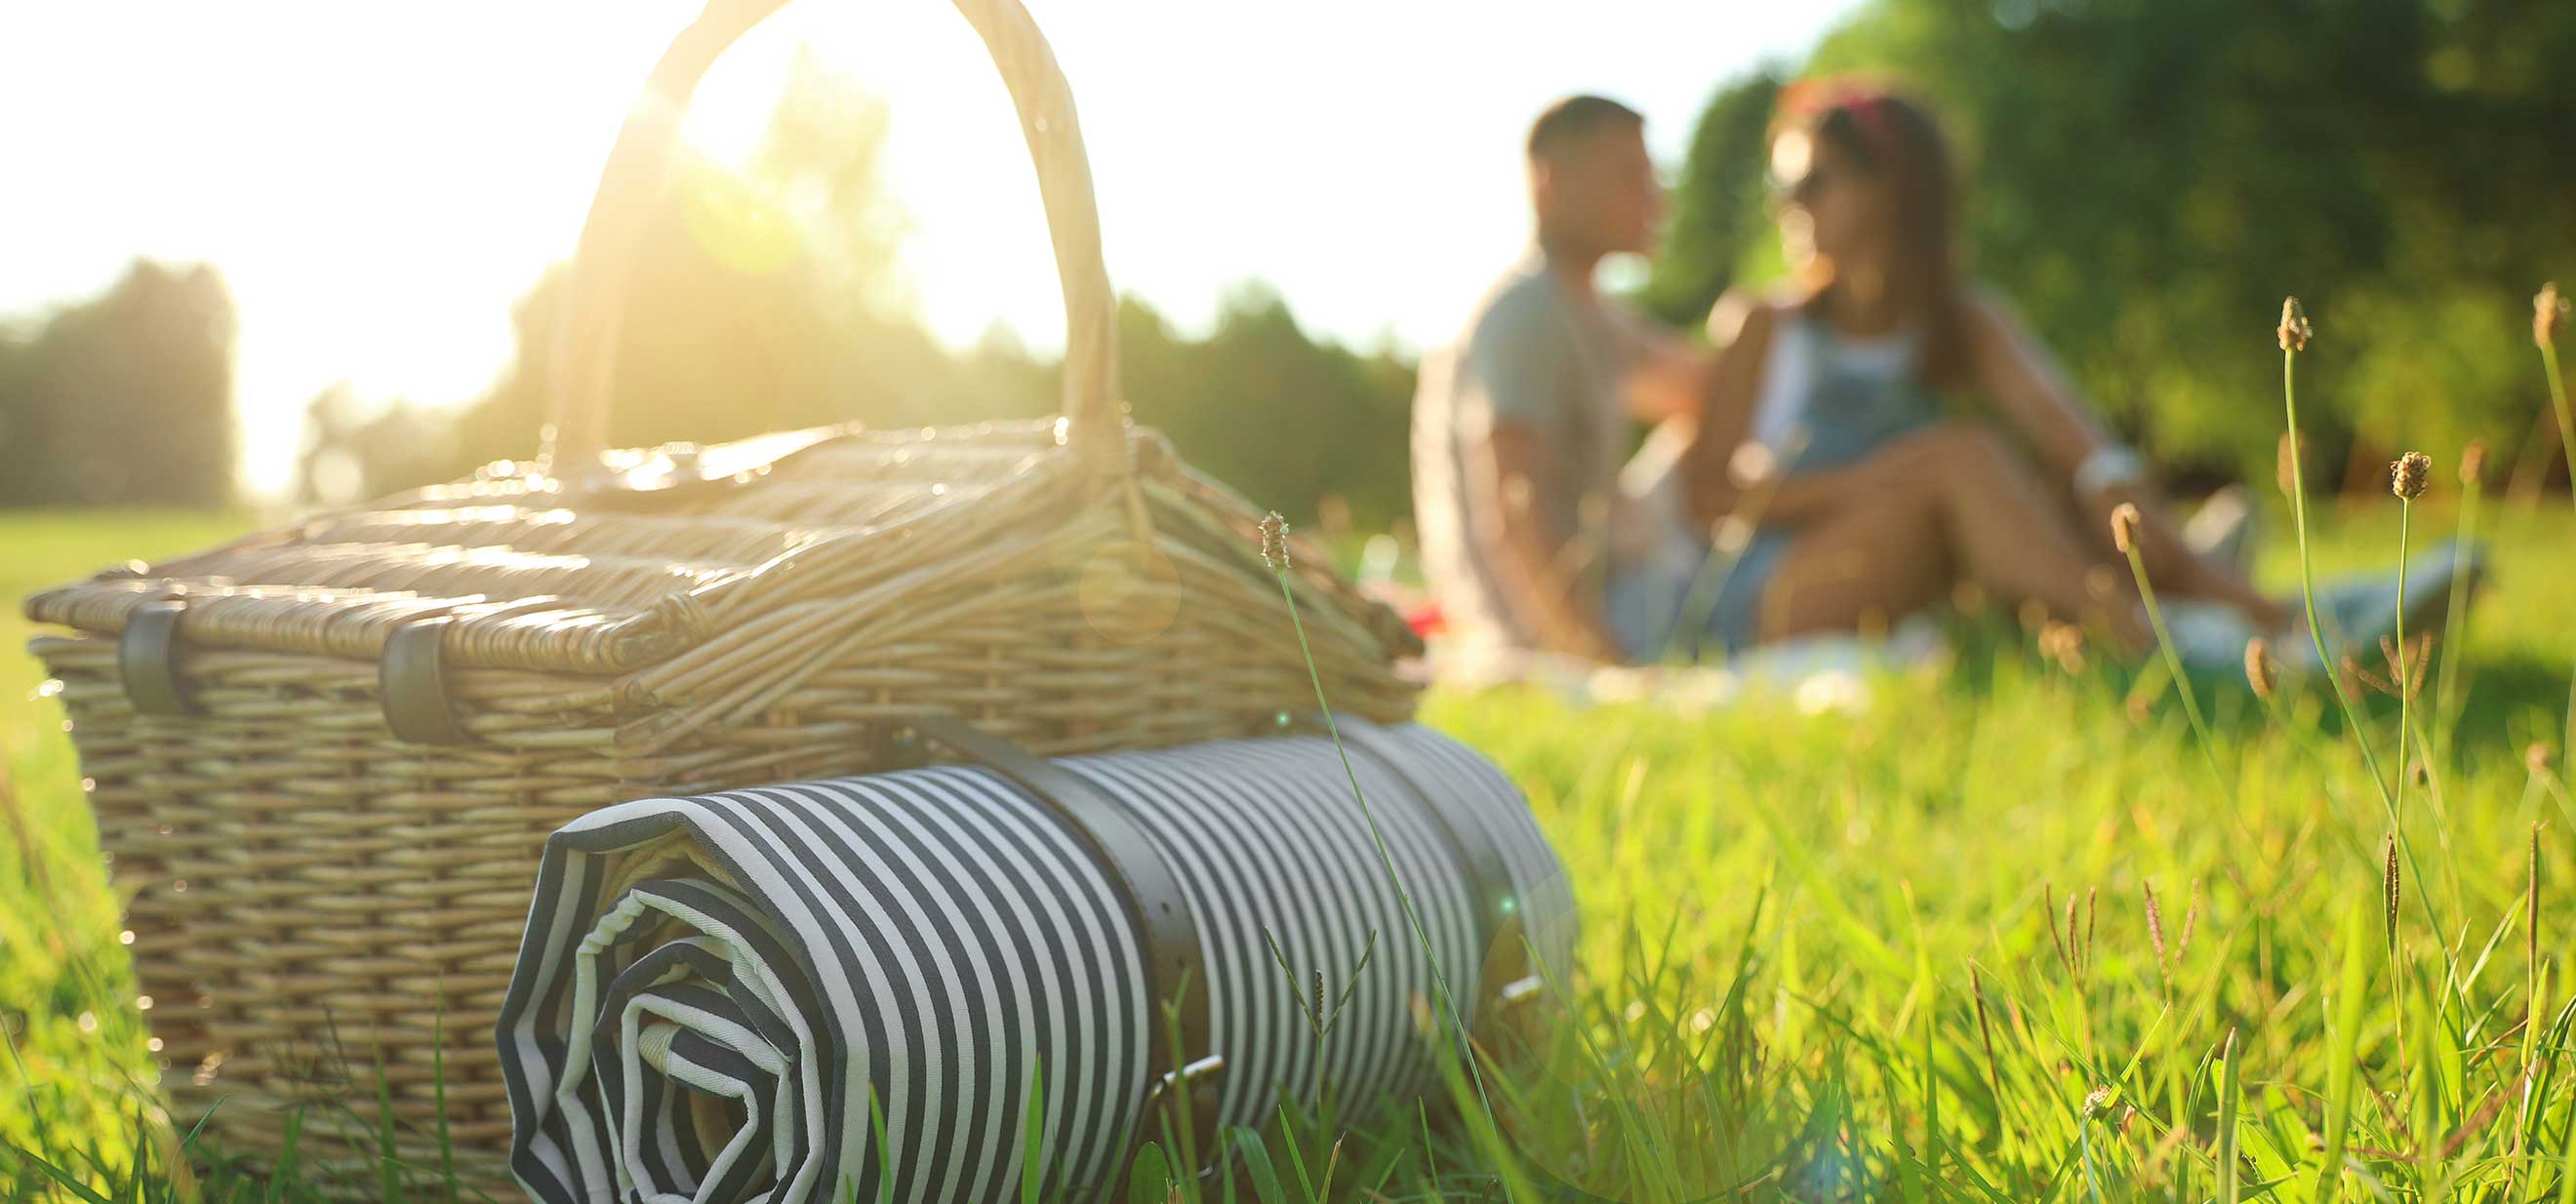 Couple having a romantic picnic in the grass